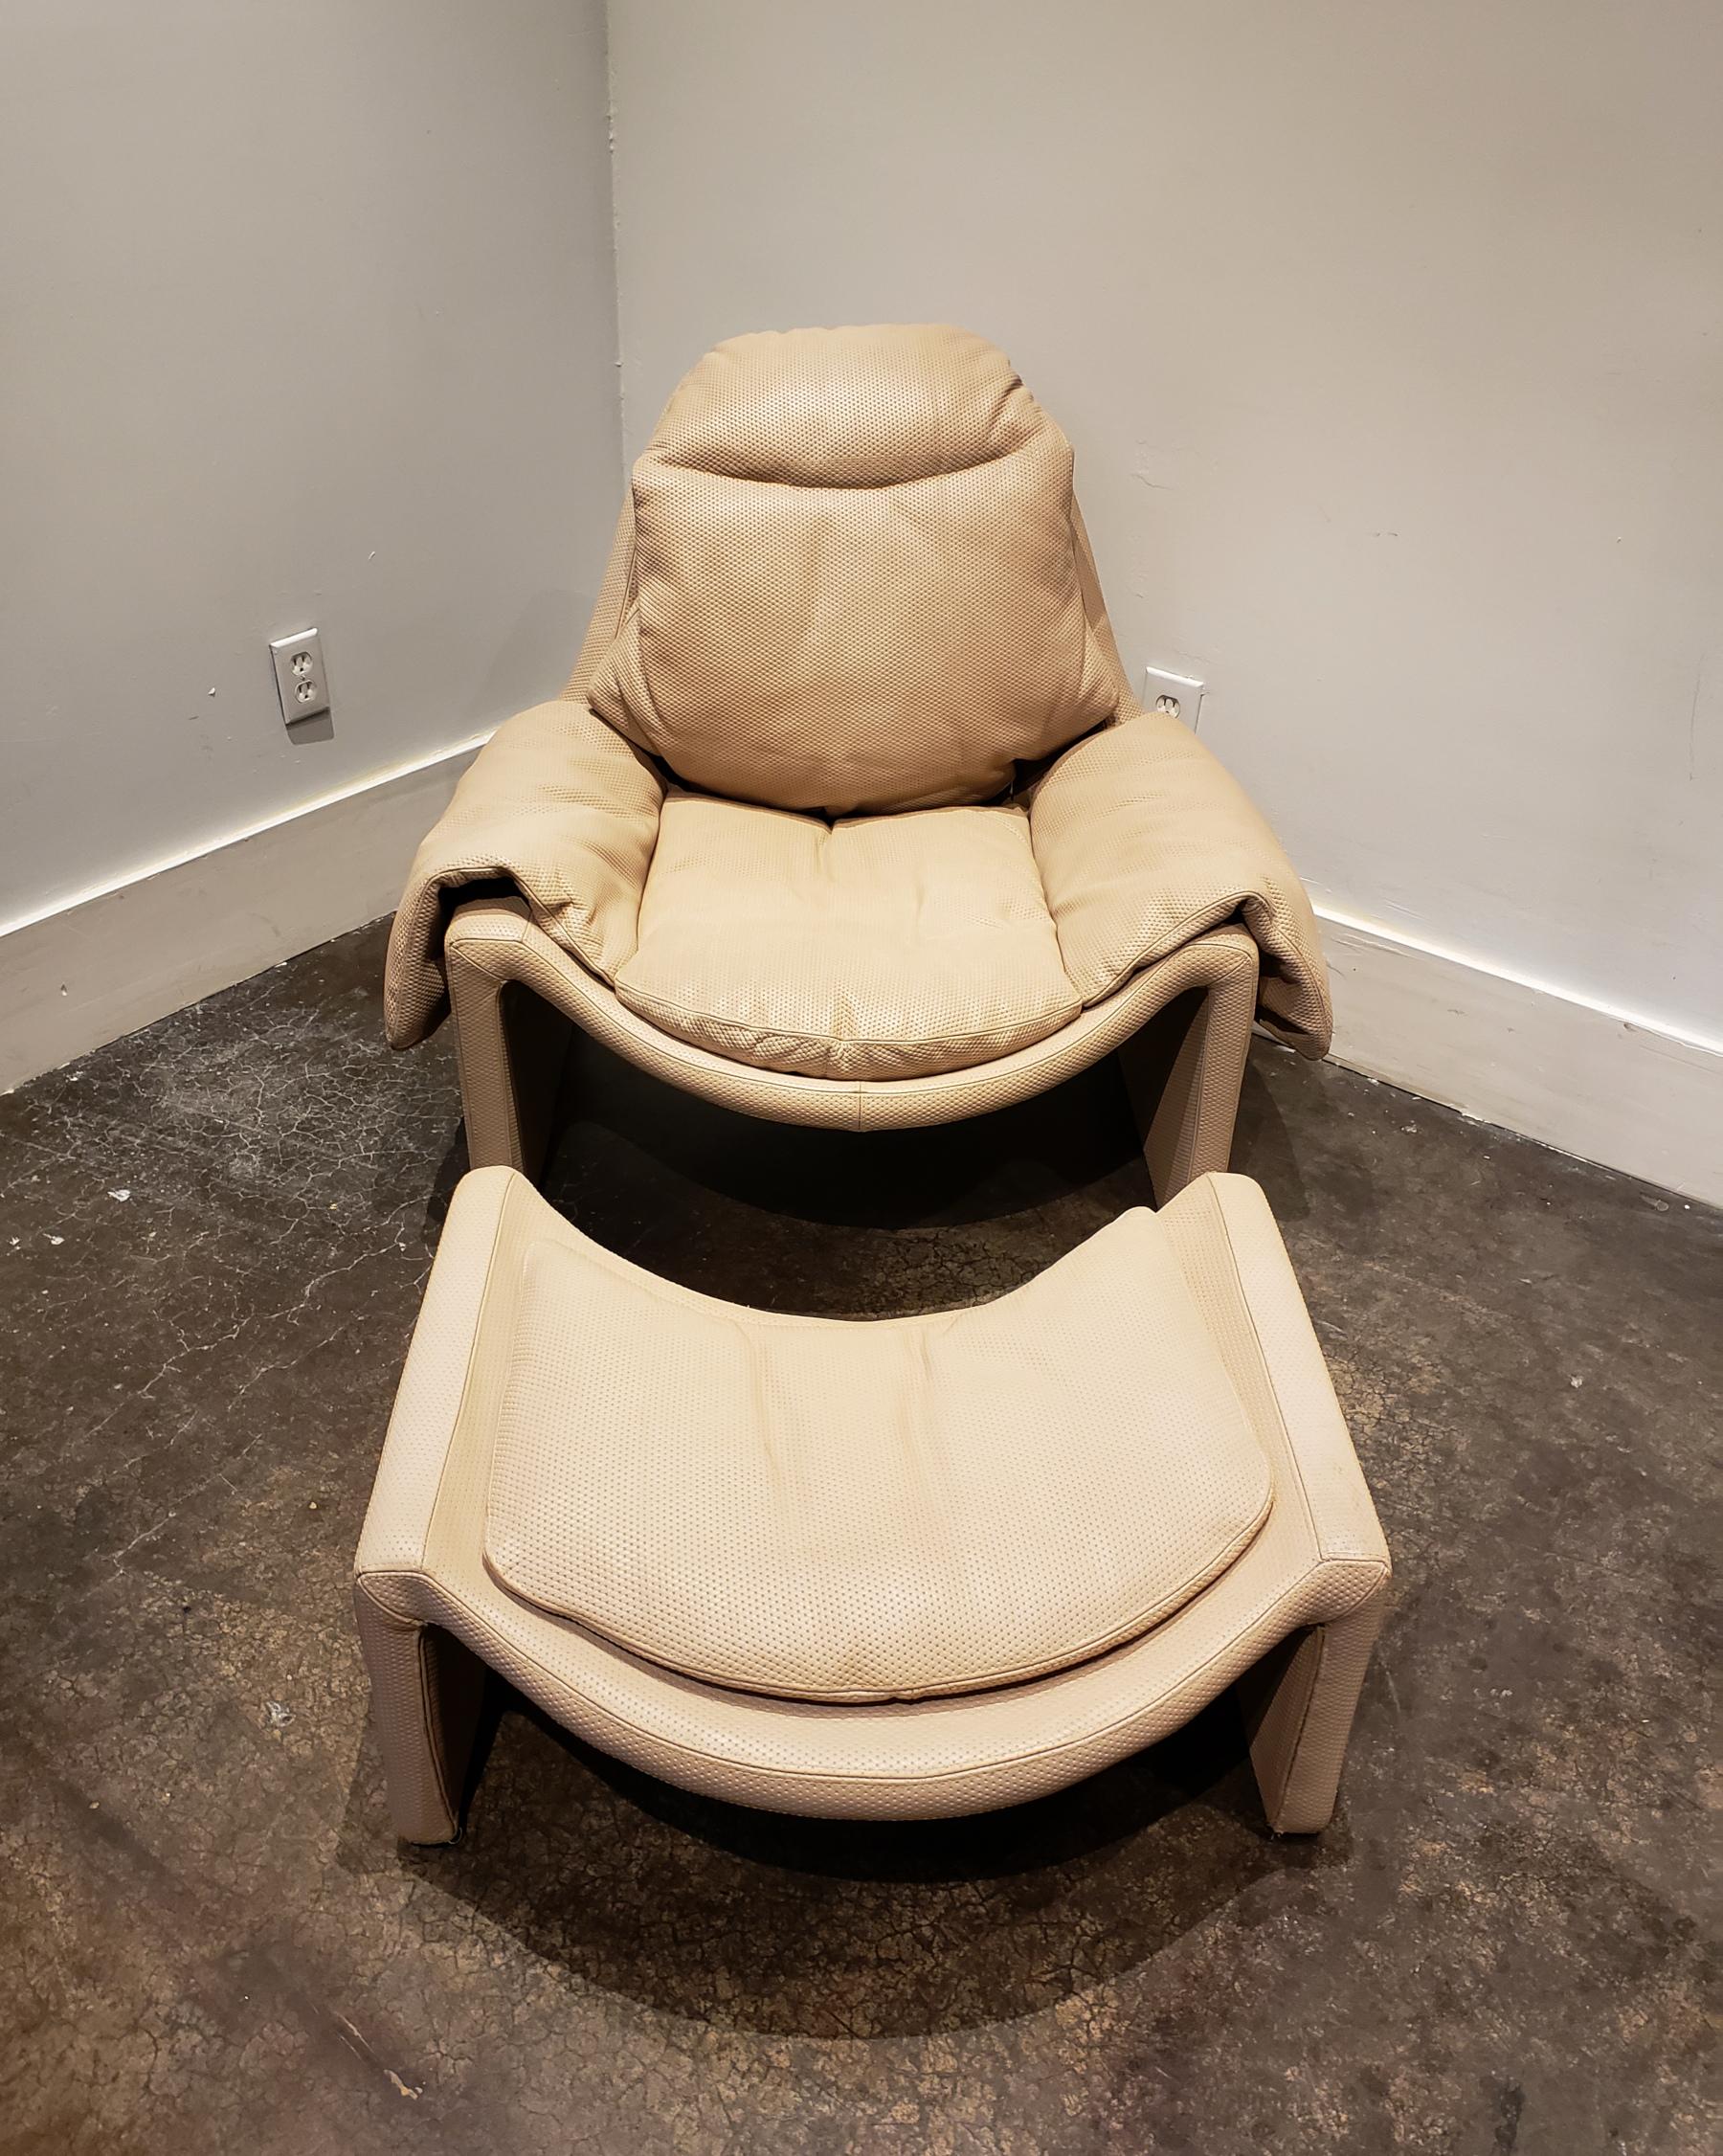 Saporiti lounge chair and ottoman designed by Vittorio Introini in the 1960s. This model hails from the 1980s and is covered in a comfortable textured synthetic leather in taupe. In very good condition with light signs of use. 

Chair dimensions: